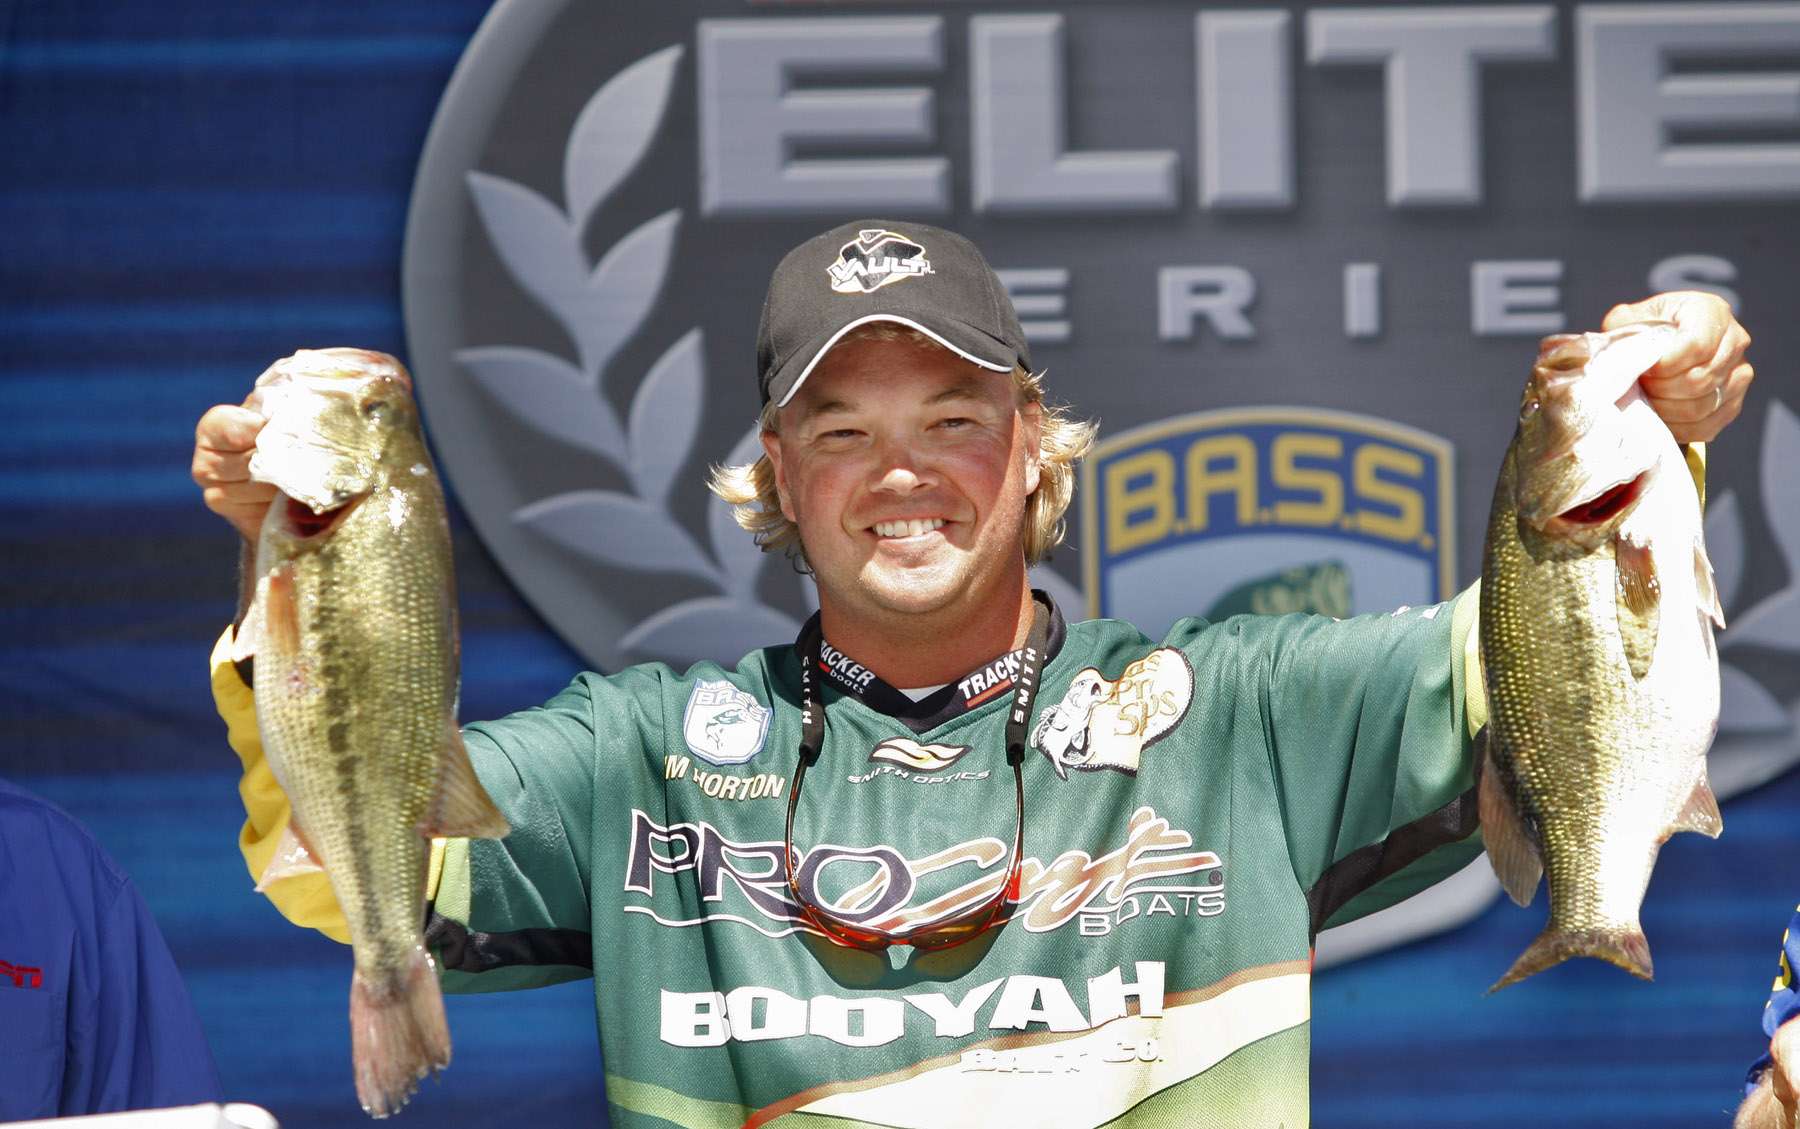 A number of Bass Pro Shops Bassmaster Opens have been held on Lake Champlain. The most recent Elite tournament was in 2007, when Alabama pro Tim Horton won with 83-10. 